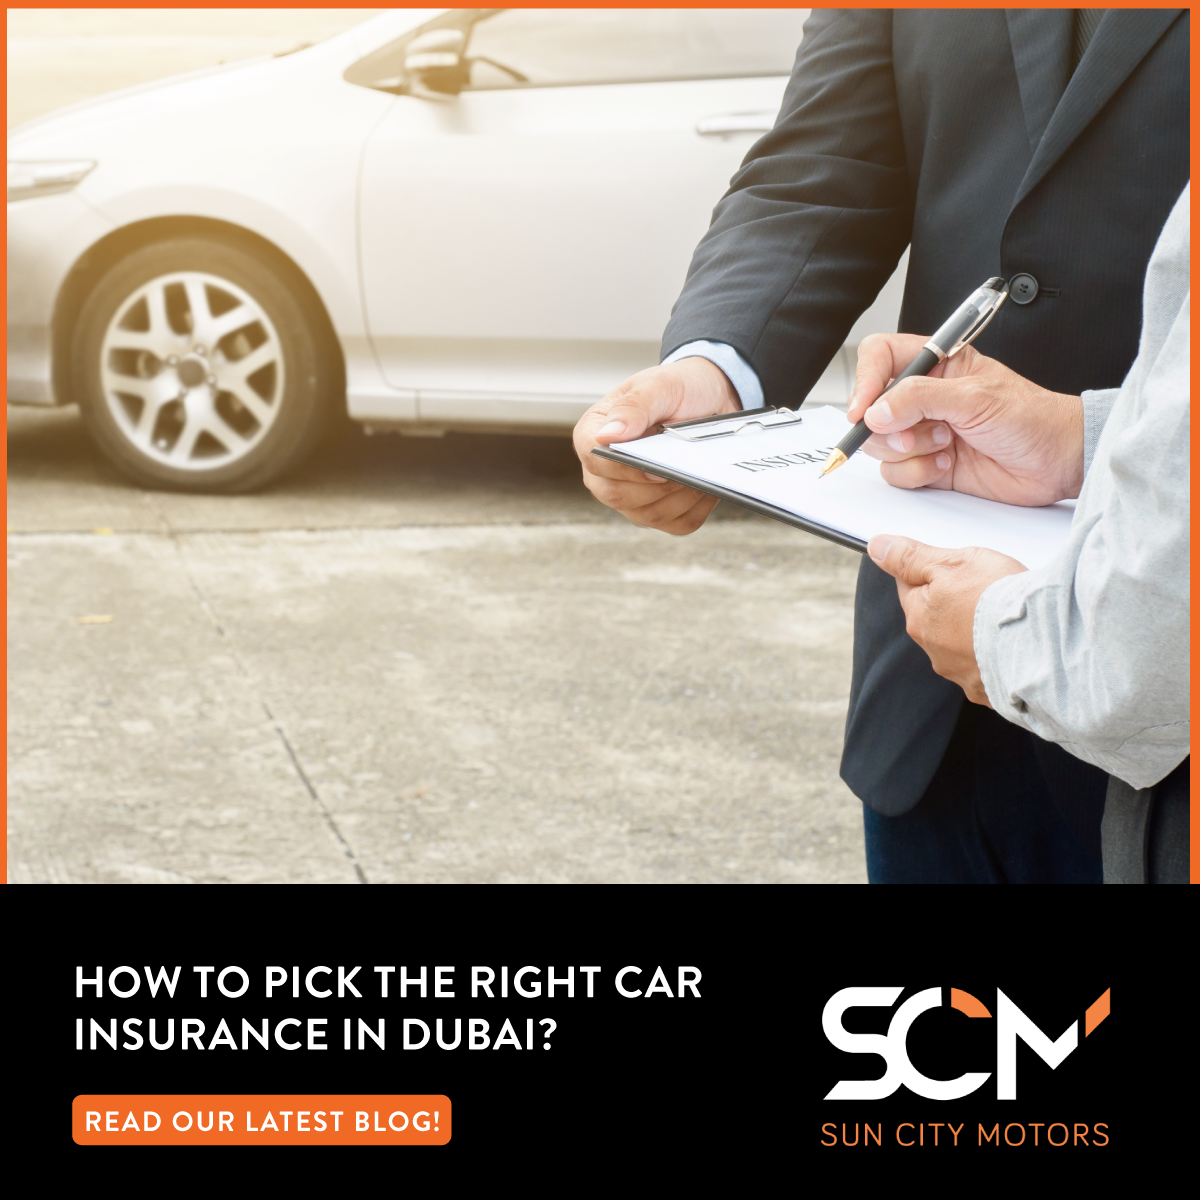 How to Pick the Right Car Insurance in Dubai?